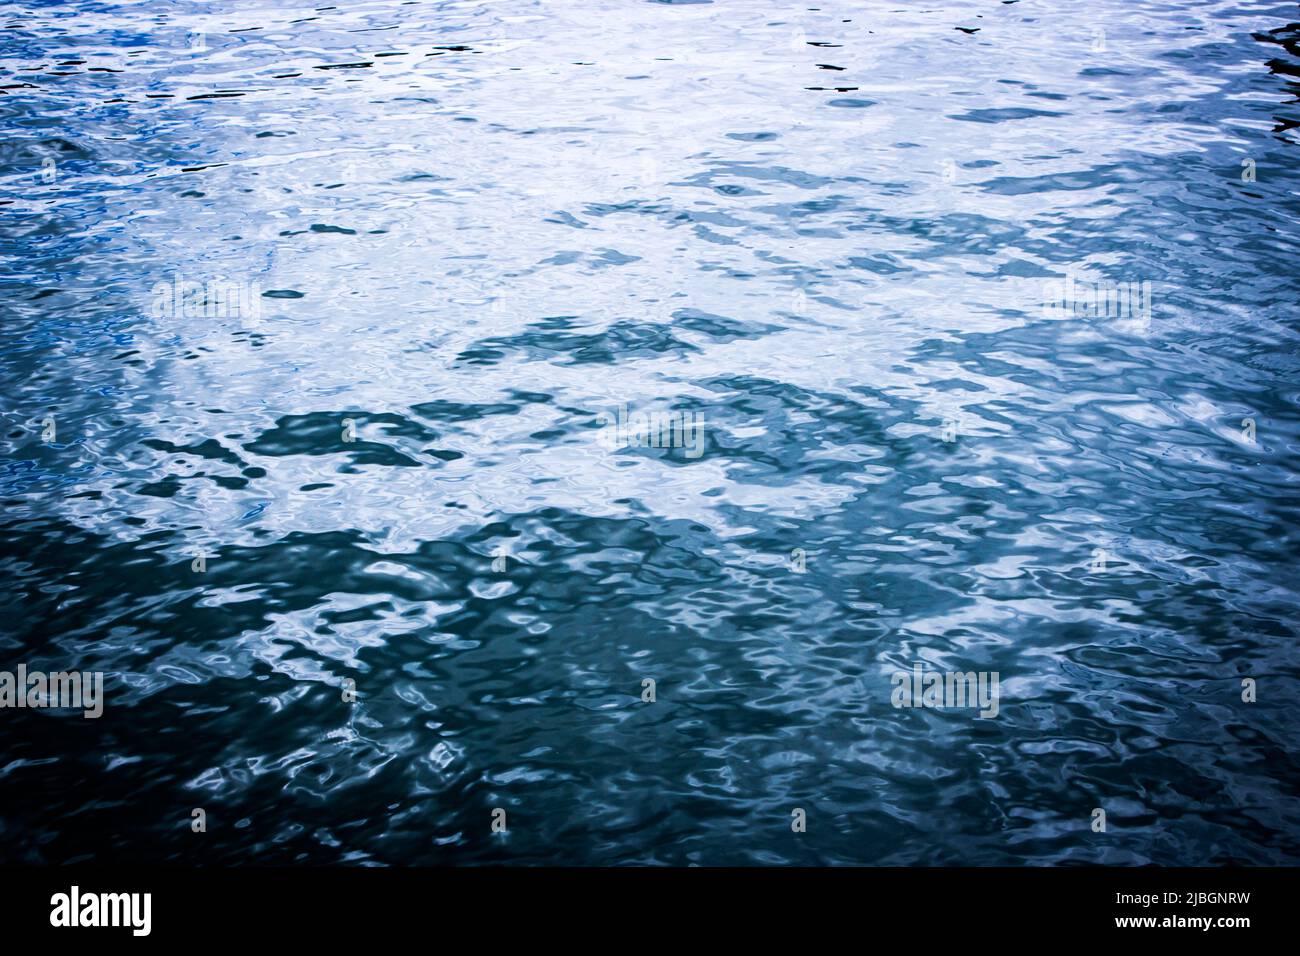 Abstract navy blue coloured water surface background with vibrant. Stock Photo